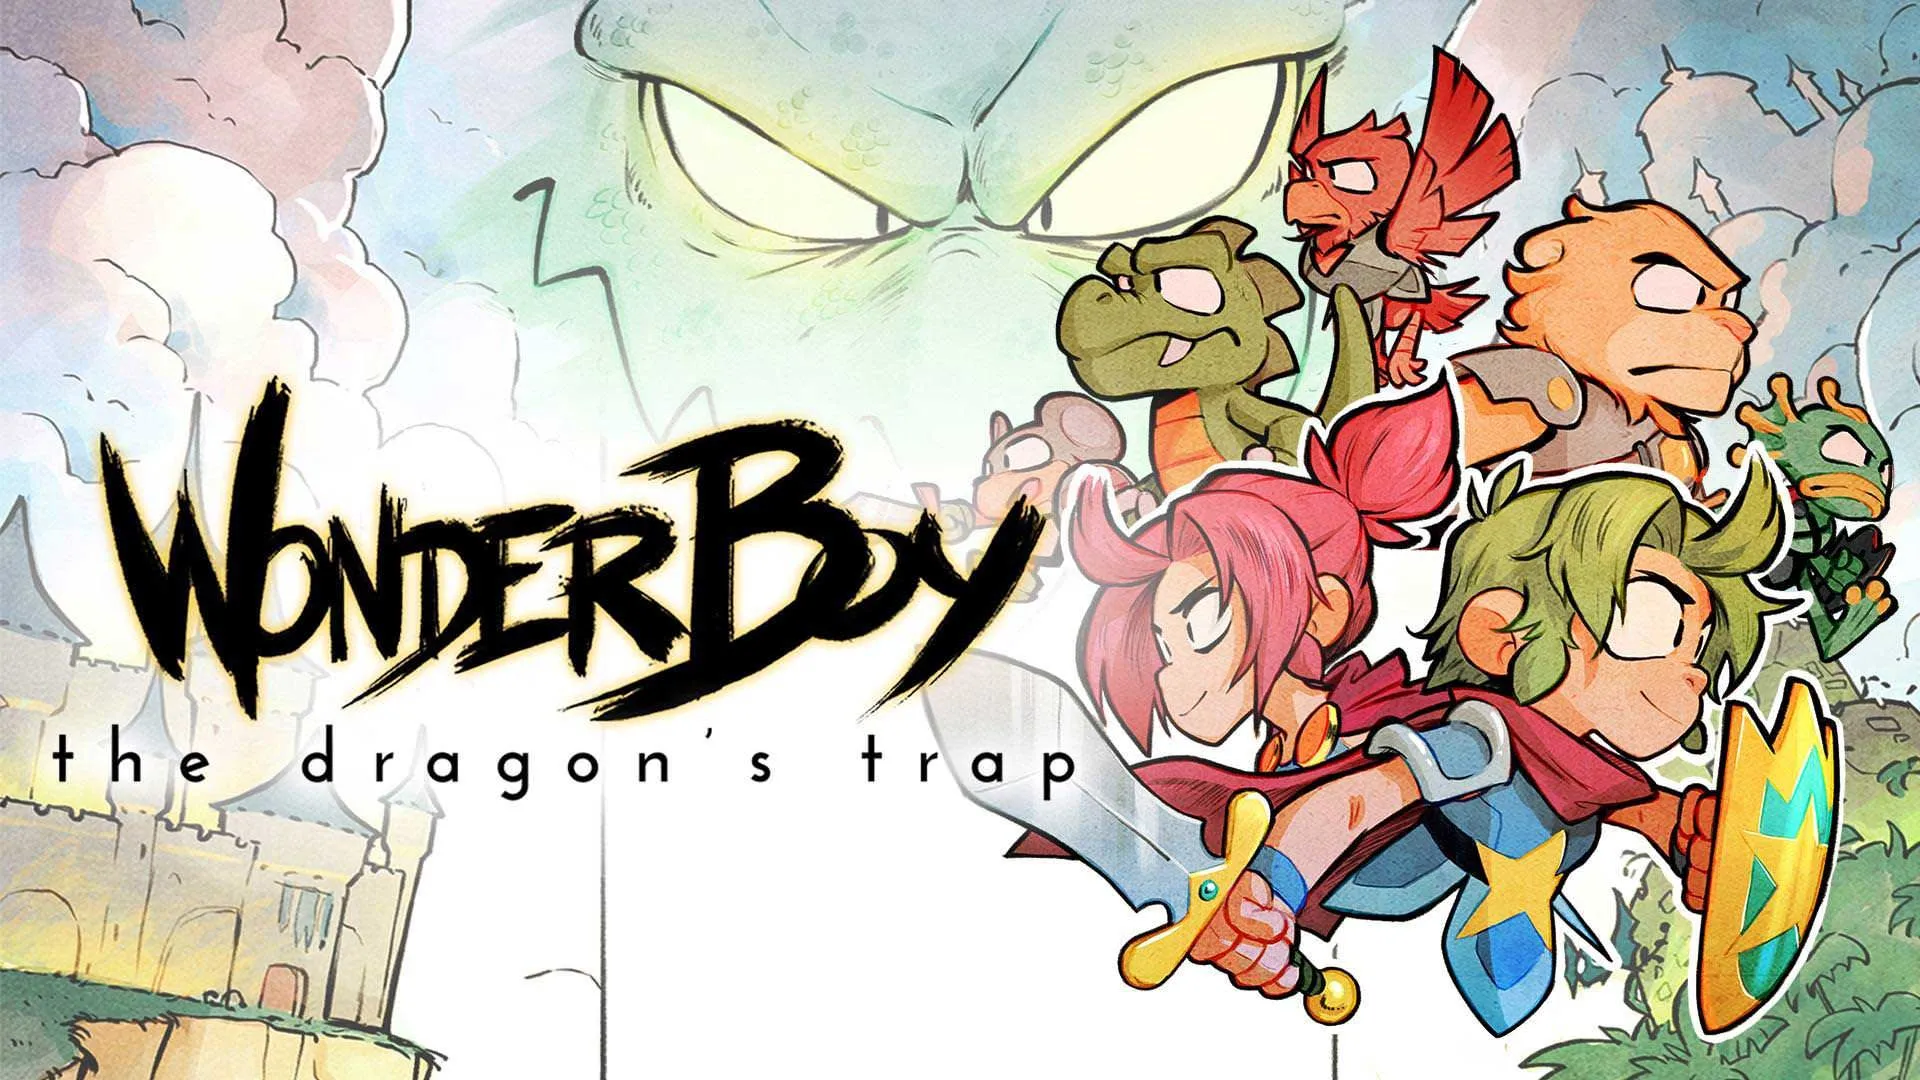 Wonder Boy: The Dragon's Trap and Gladiators of the Black Pits Pack free at Epic Games Store